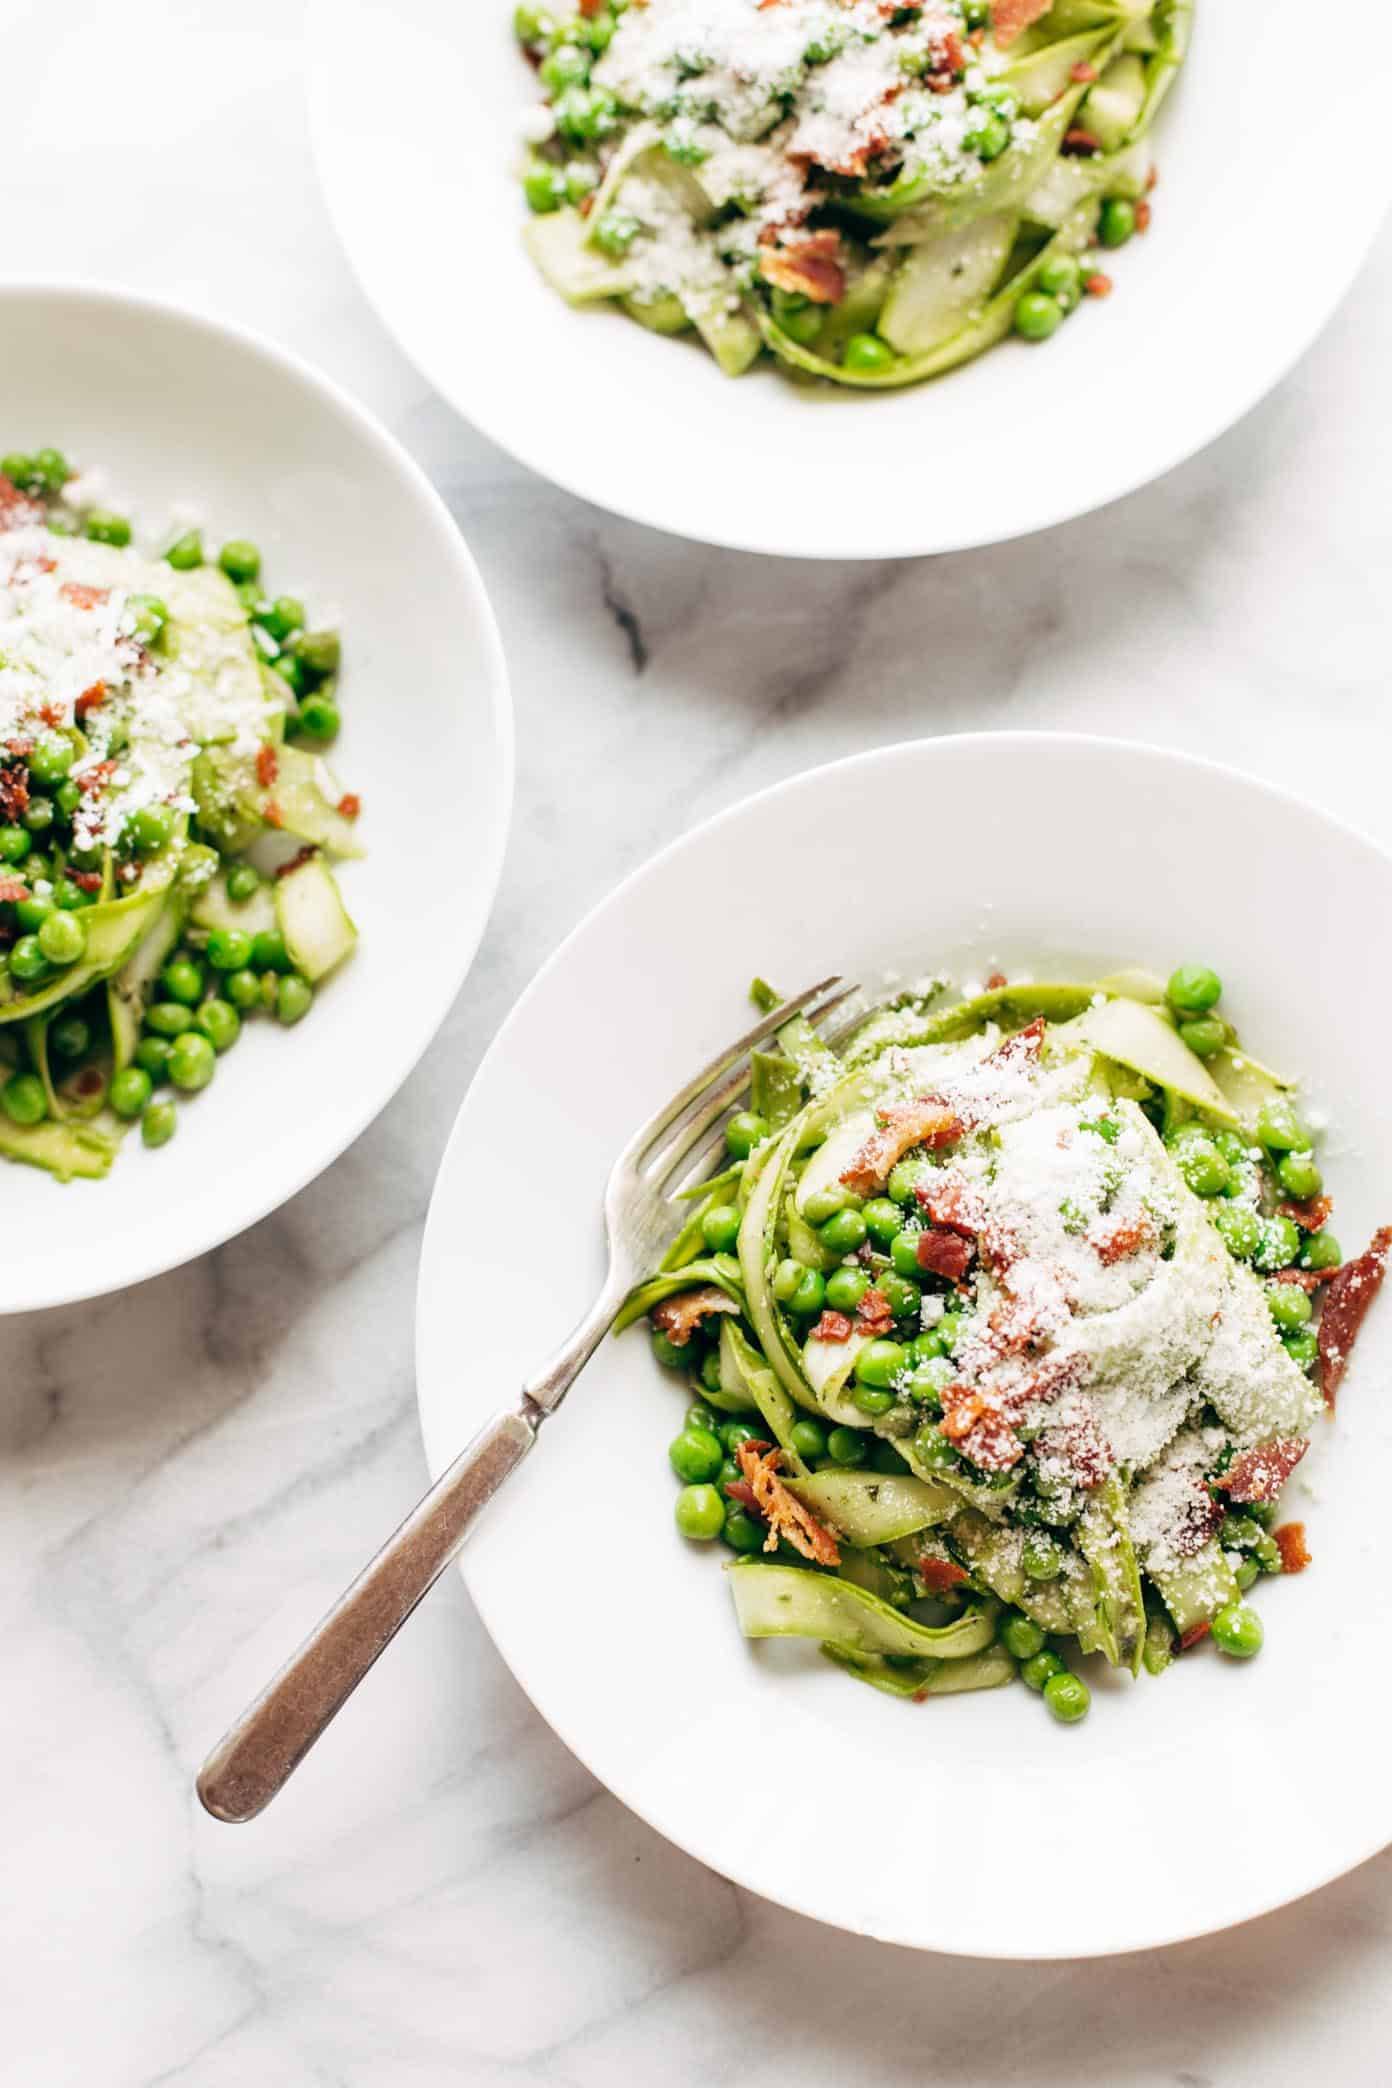 Asparagus Noodles with Pesto in bowls with forks.